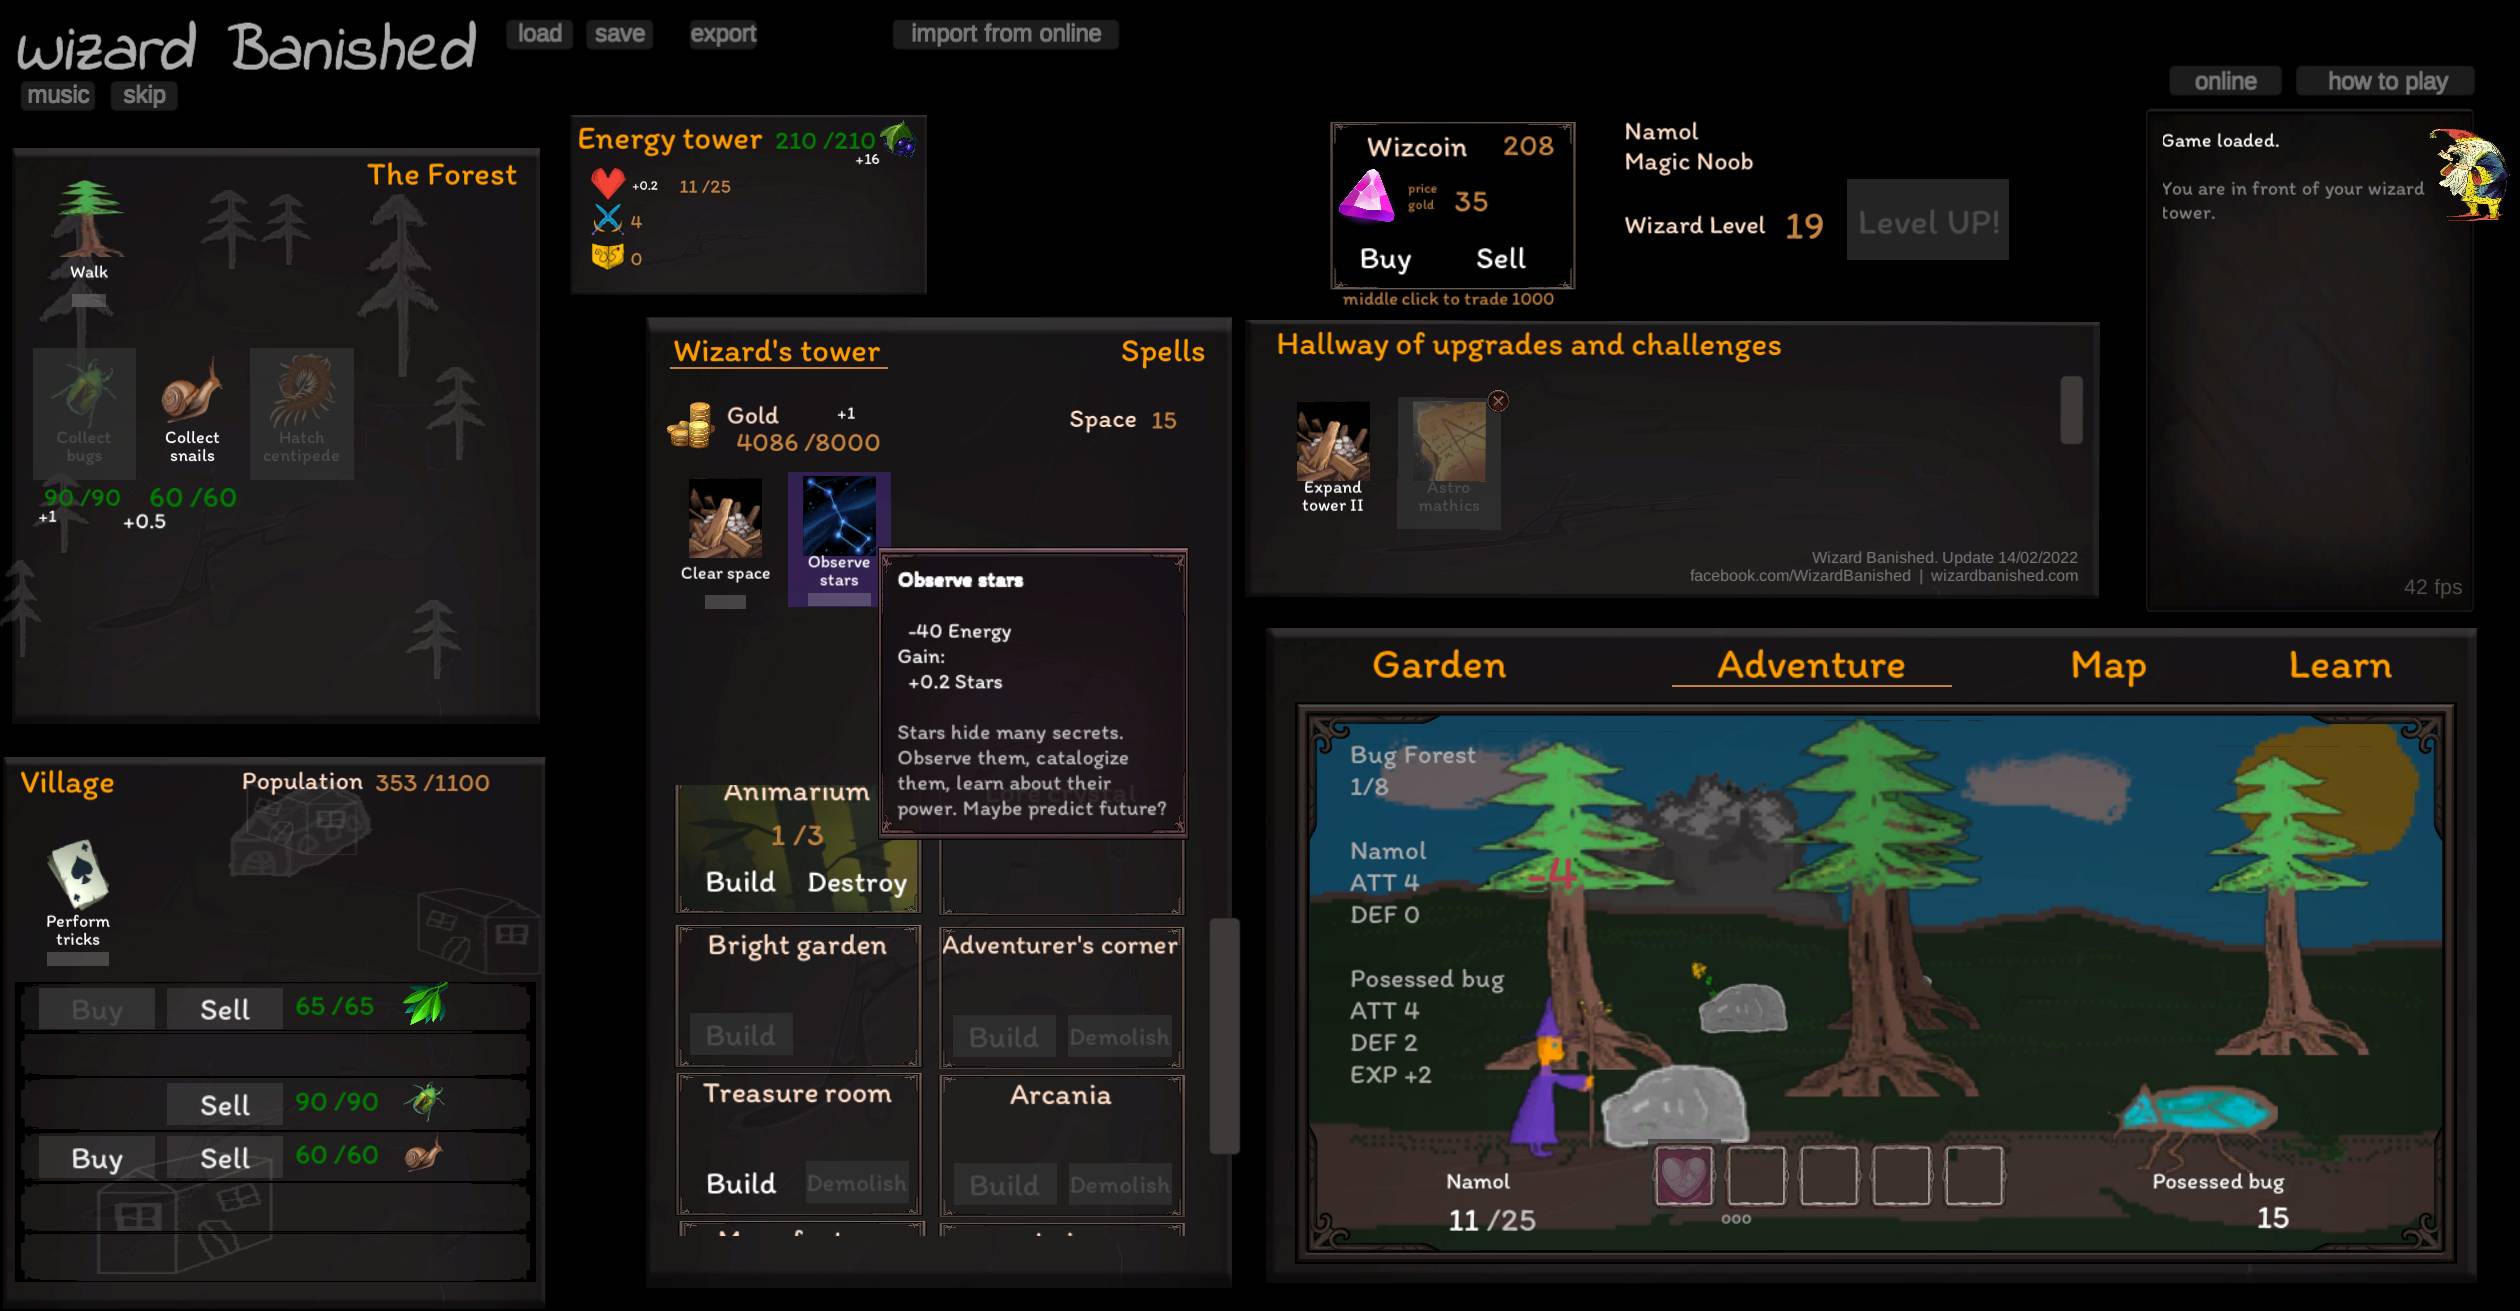 Wizard Banished is free semi-idle incremental game.